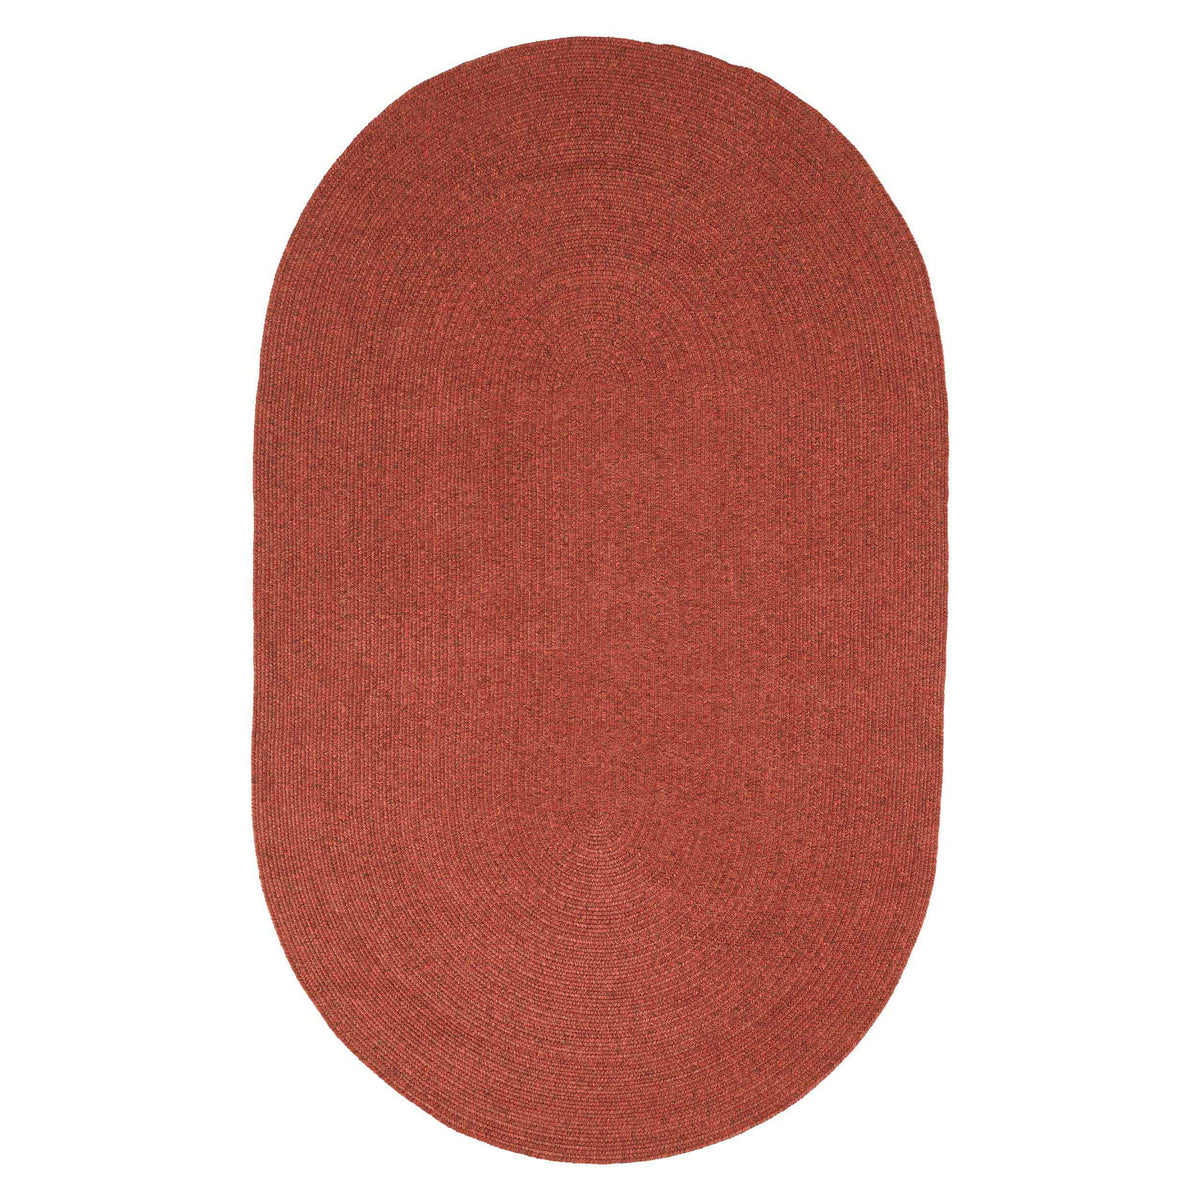 Classic Braided Weave Oval Area Rug Indoor Outdoor Rugs - Brick